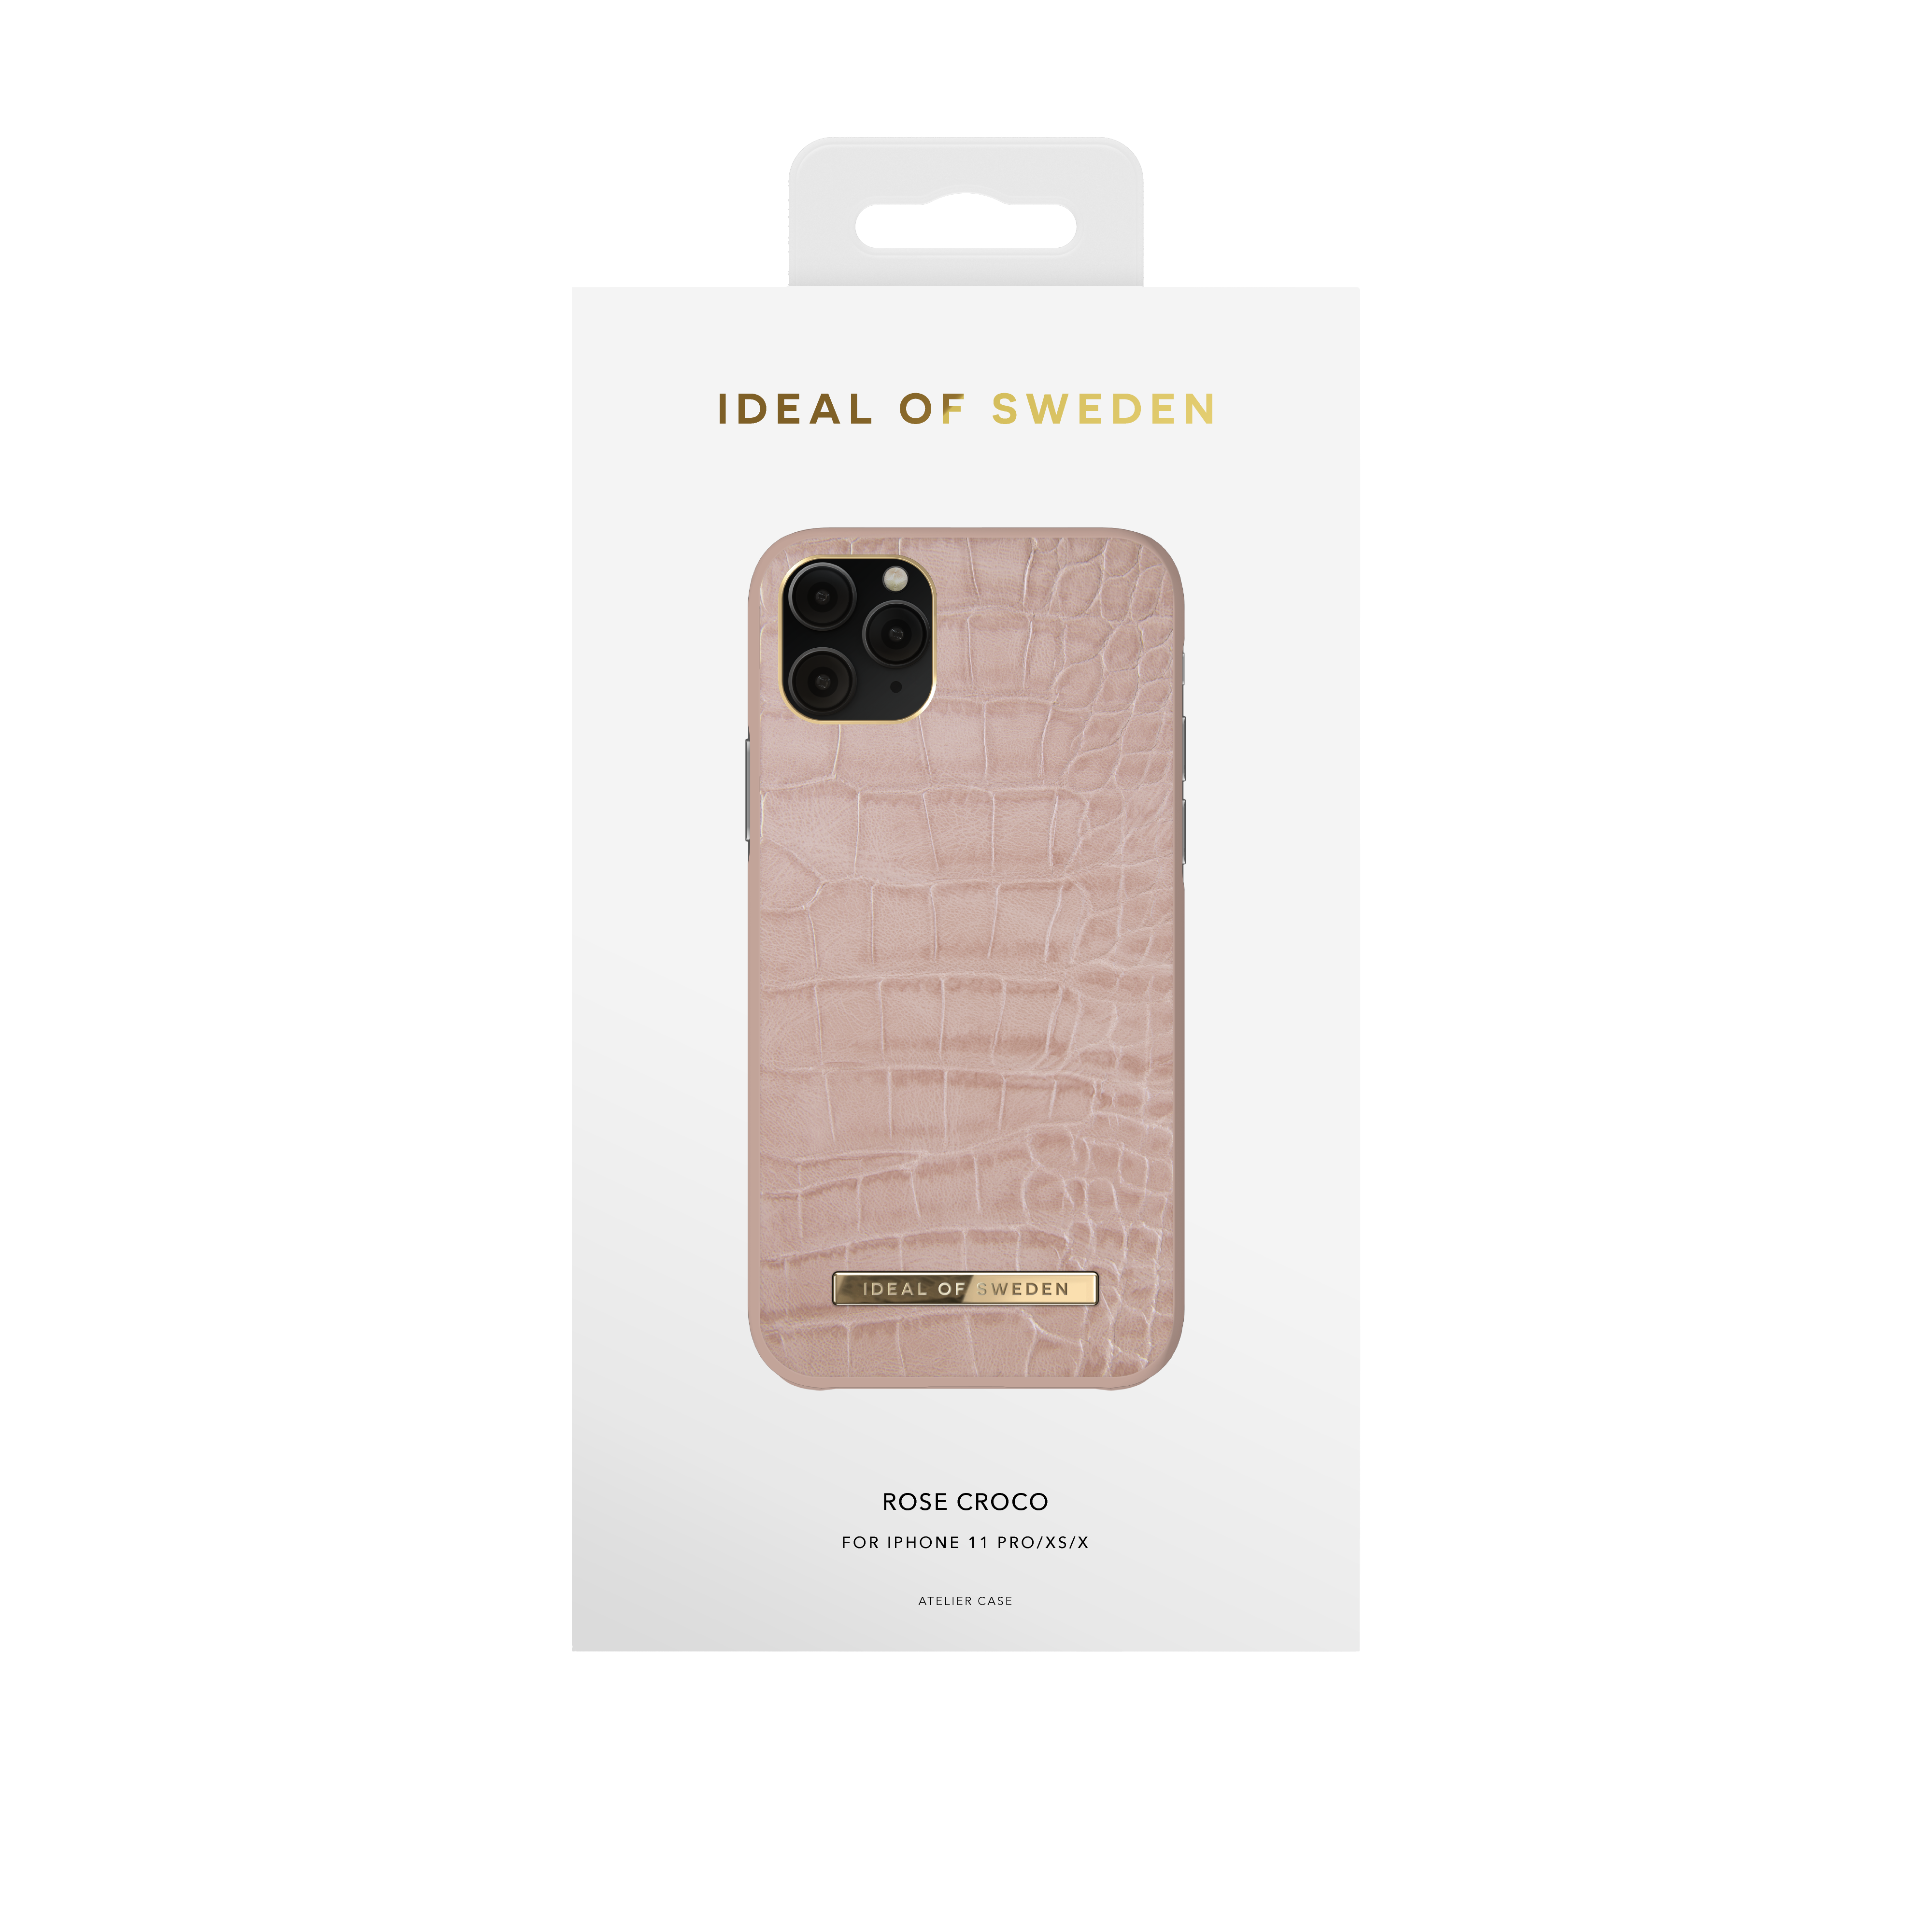 SWEDEN Backcover, 11 IDACSS21-I1958-273, IDEAL X, Croco Rose iPhone Apple, Pro, XS, iPhone OF iPhone